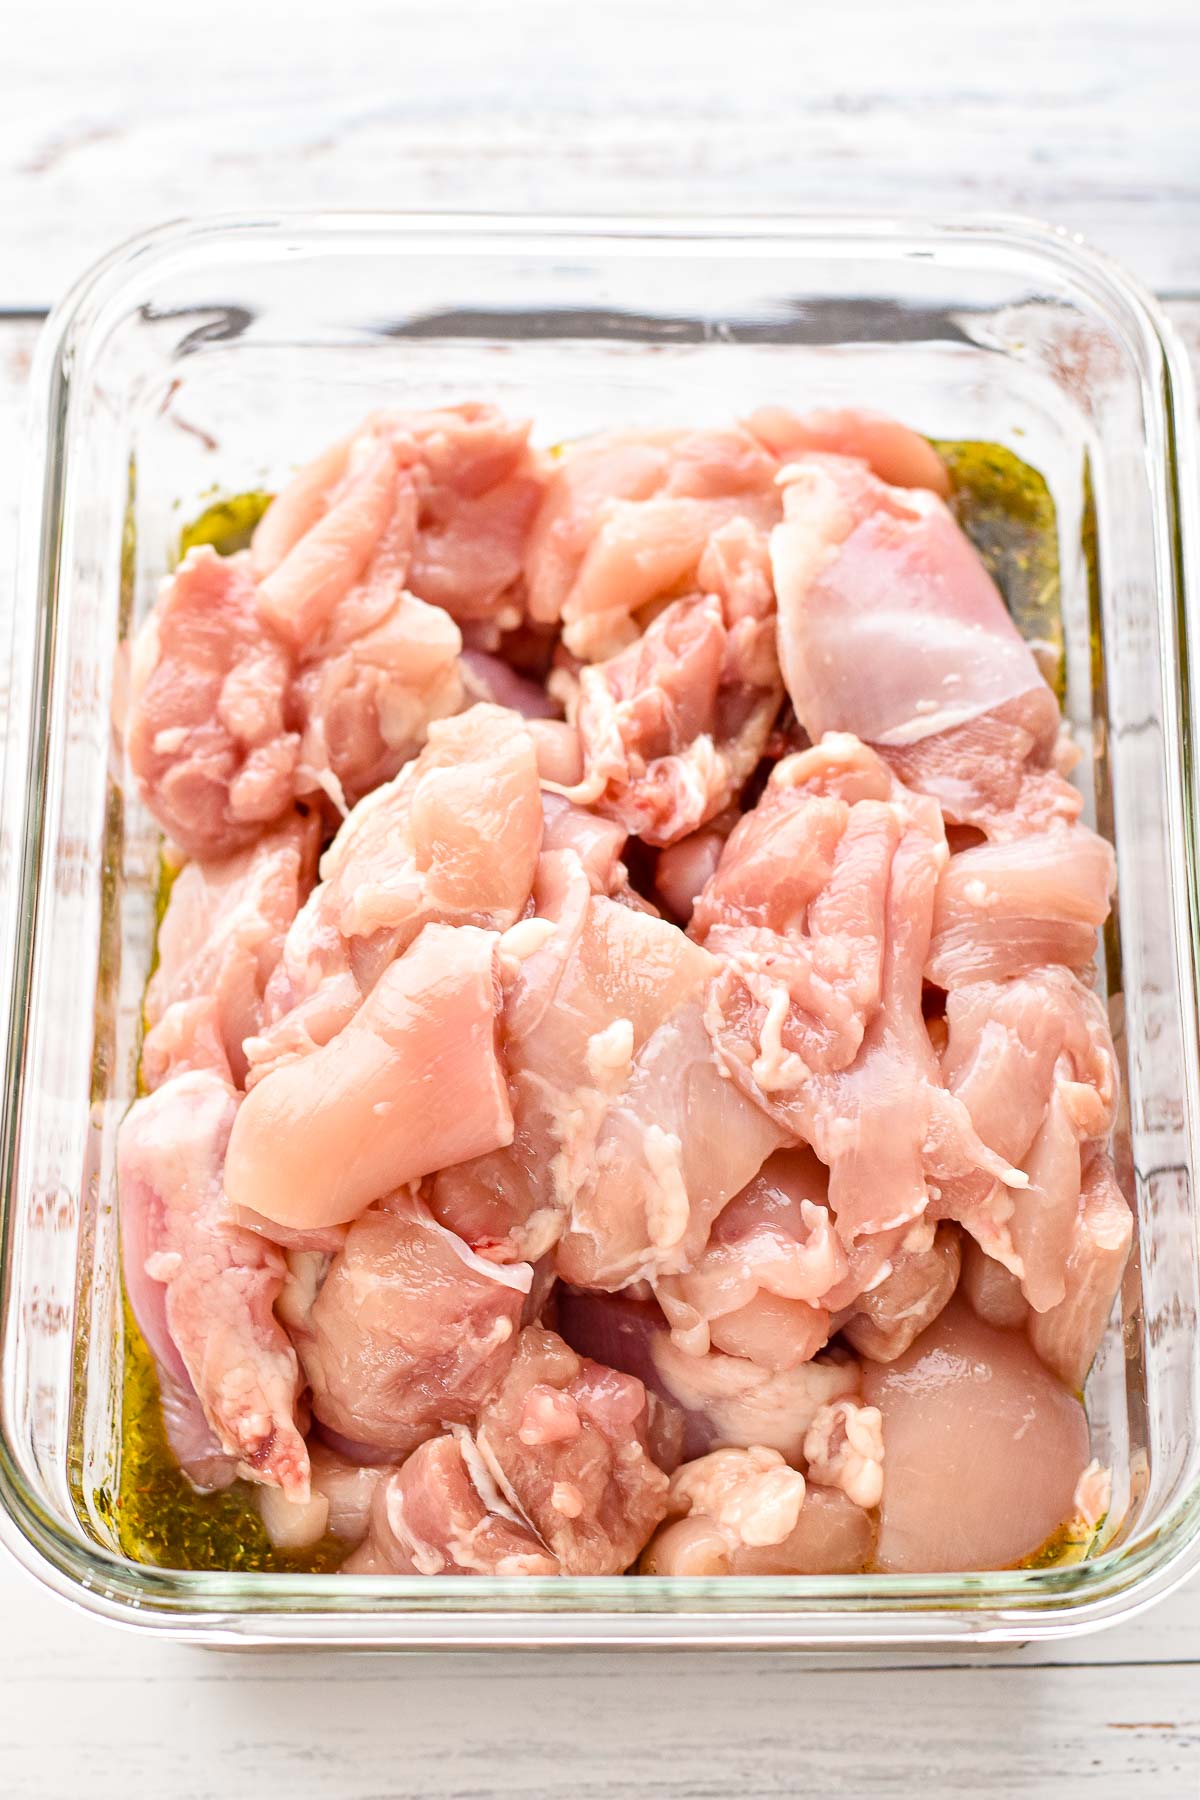 process shot after chicken thigh pieces are added to the container with greek souvlaki marinade